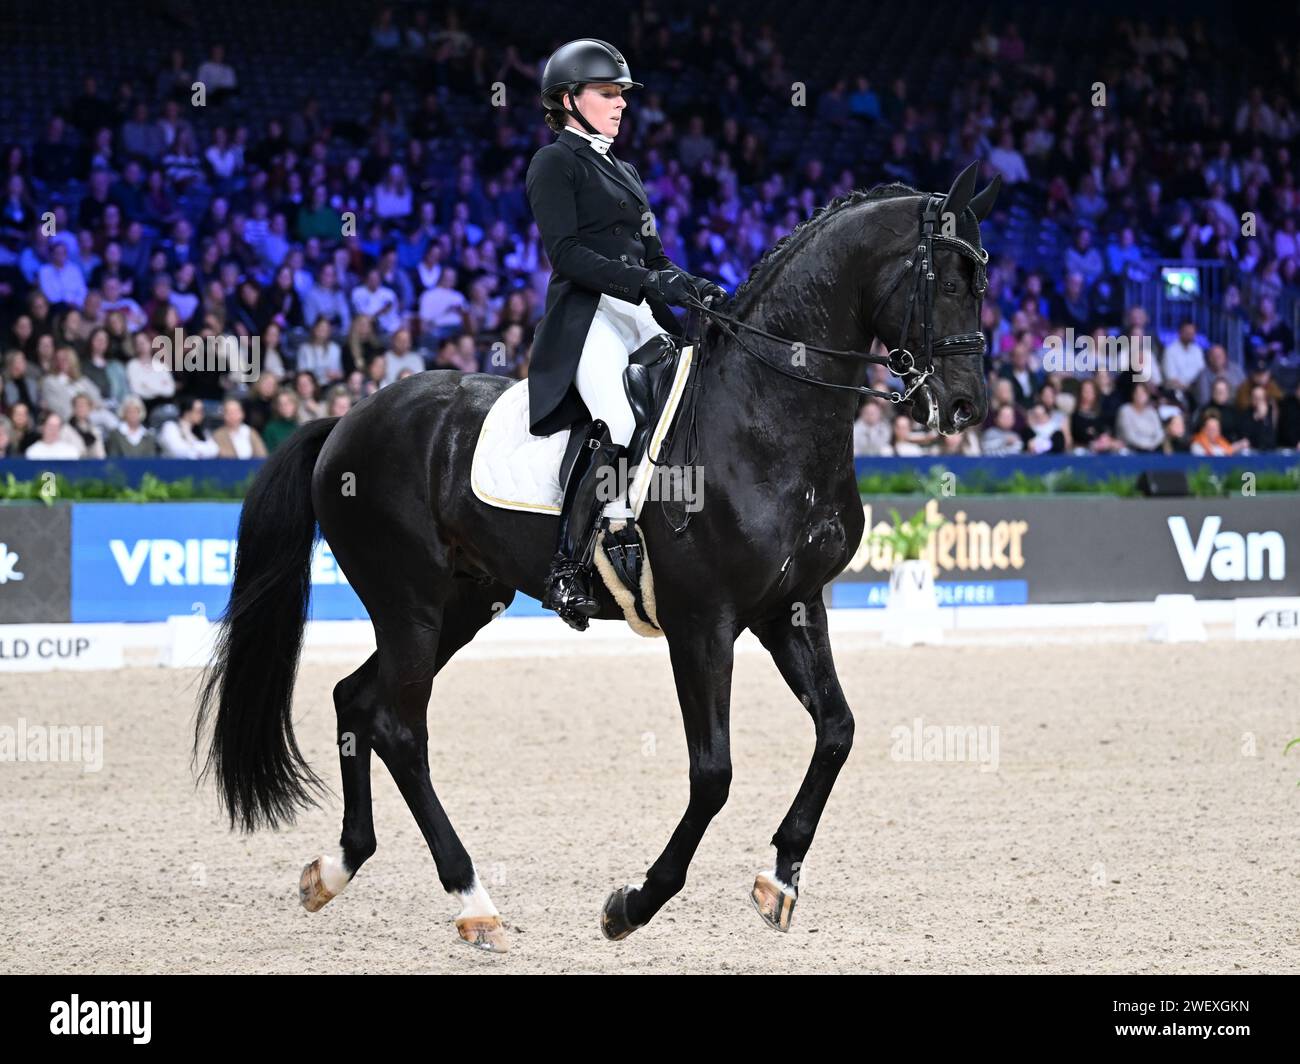 AMSTERDAM - Denise Nekeman with Boston Sth during the FEI World Cup dressage competition at the Jumping Amsterdam 2024 tournament at the RAI on January 26, 2024 in Amsterdam, the Netherlands. ANP | Hollandse Hoogte | GERRIT VAN COLOGNE Stock Photo